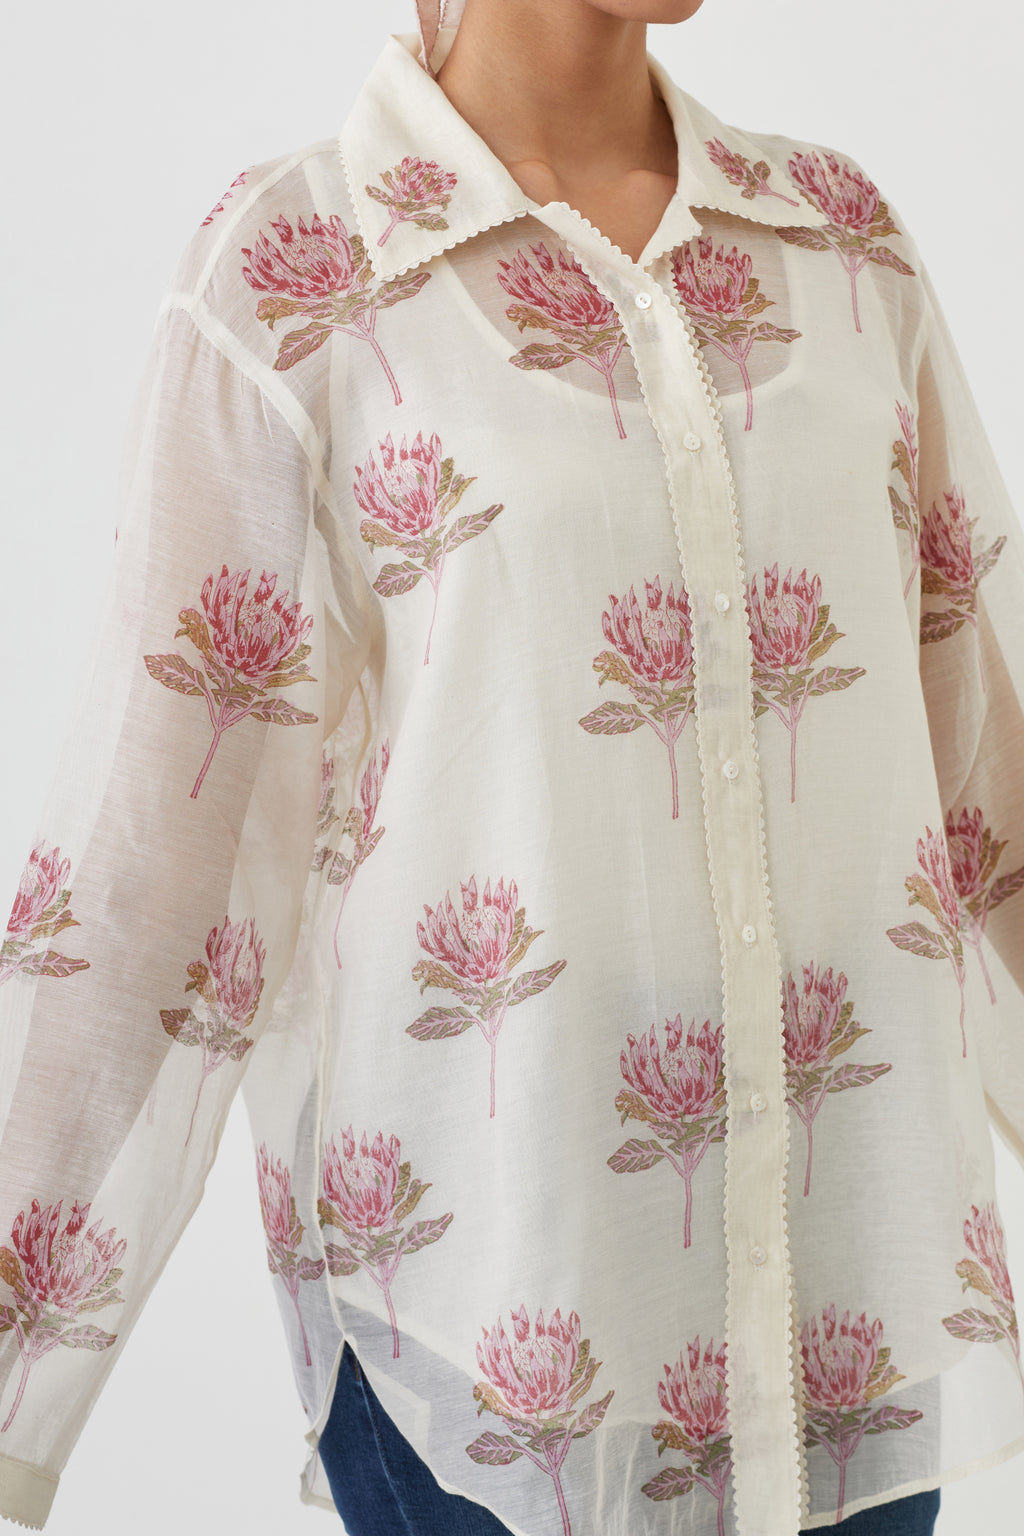 Off white cotton chanderi shirt with all-over pink floral hand block print and full sleeves.